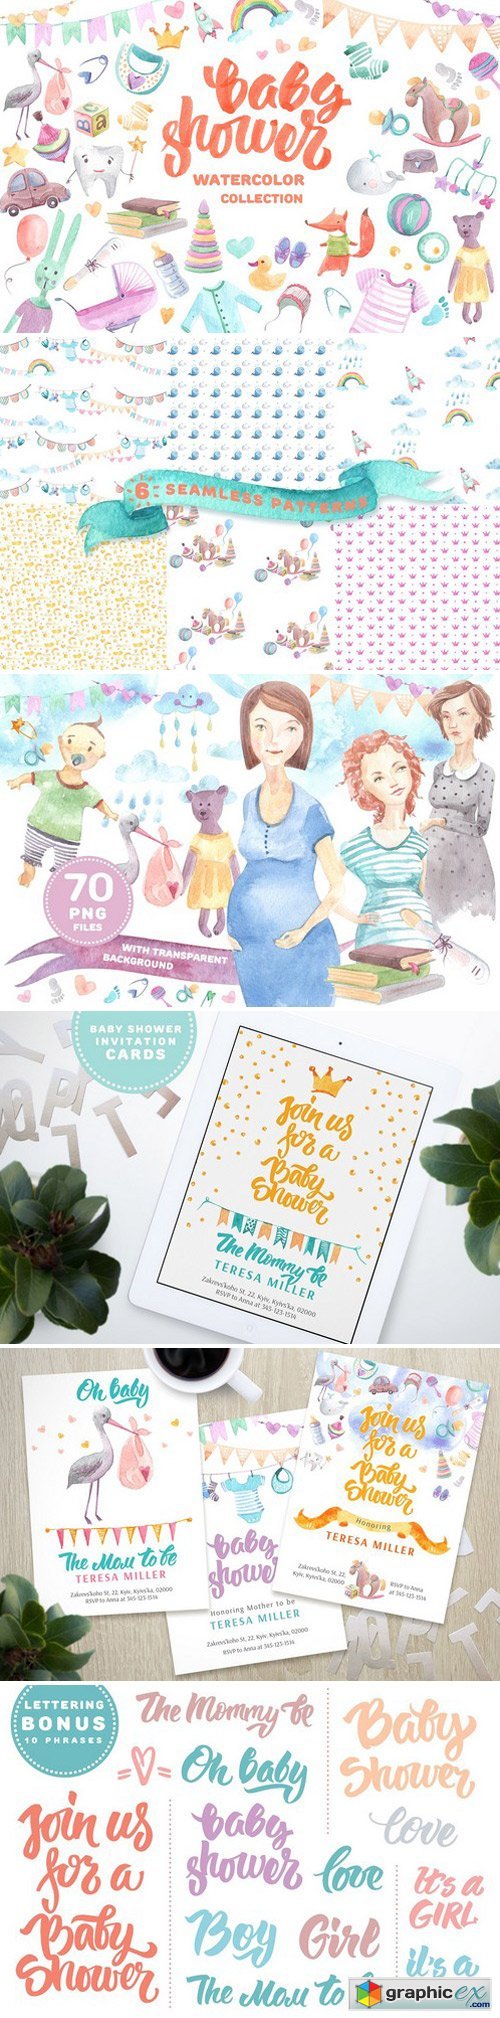 Baby shower watercolor collection